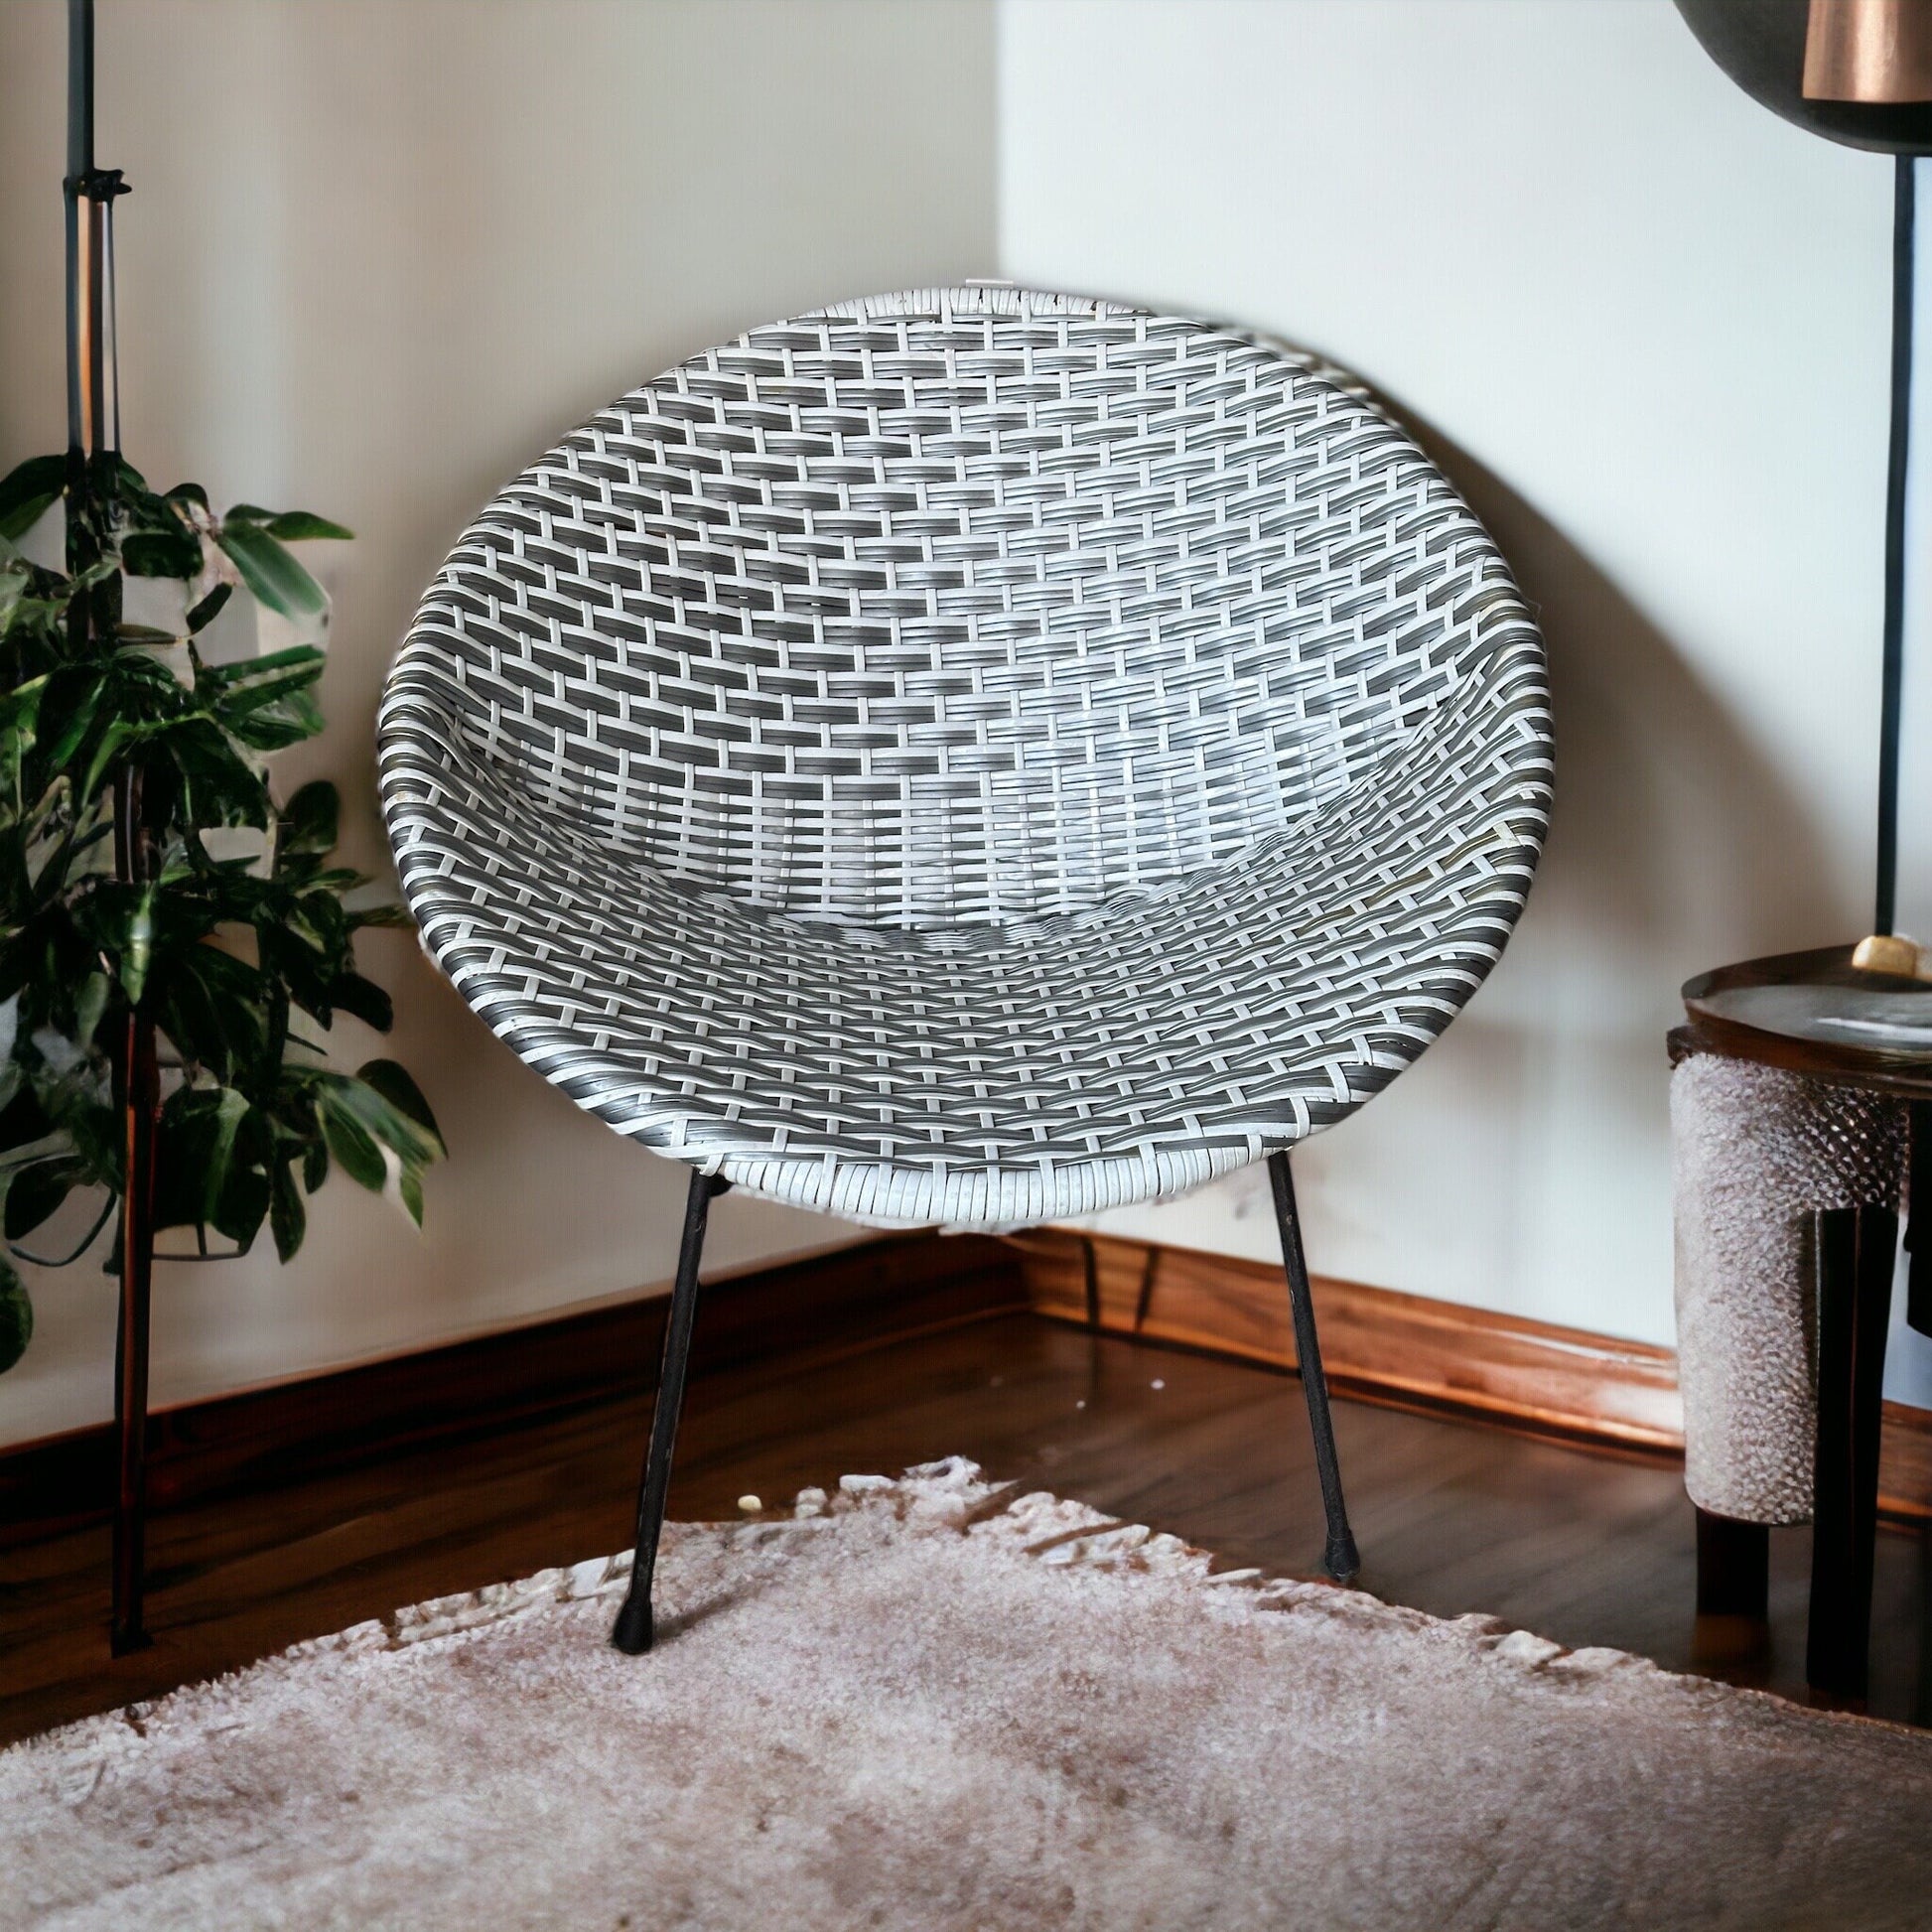 Vintage 1950’s Sputnik Satellite Woven Vinyl Chair in White and Silver